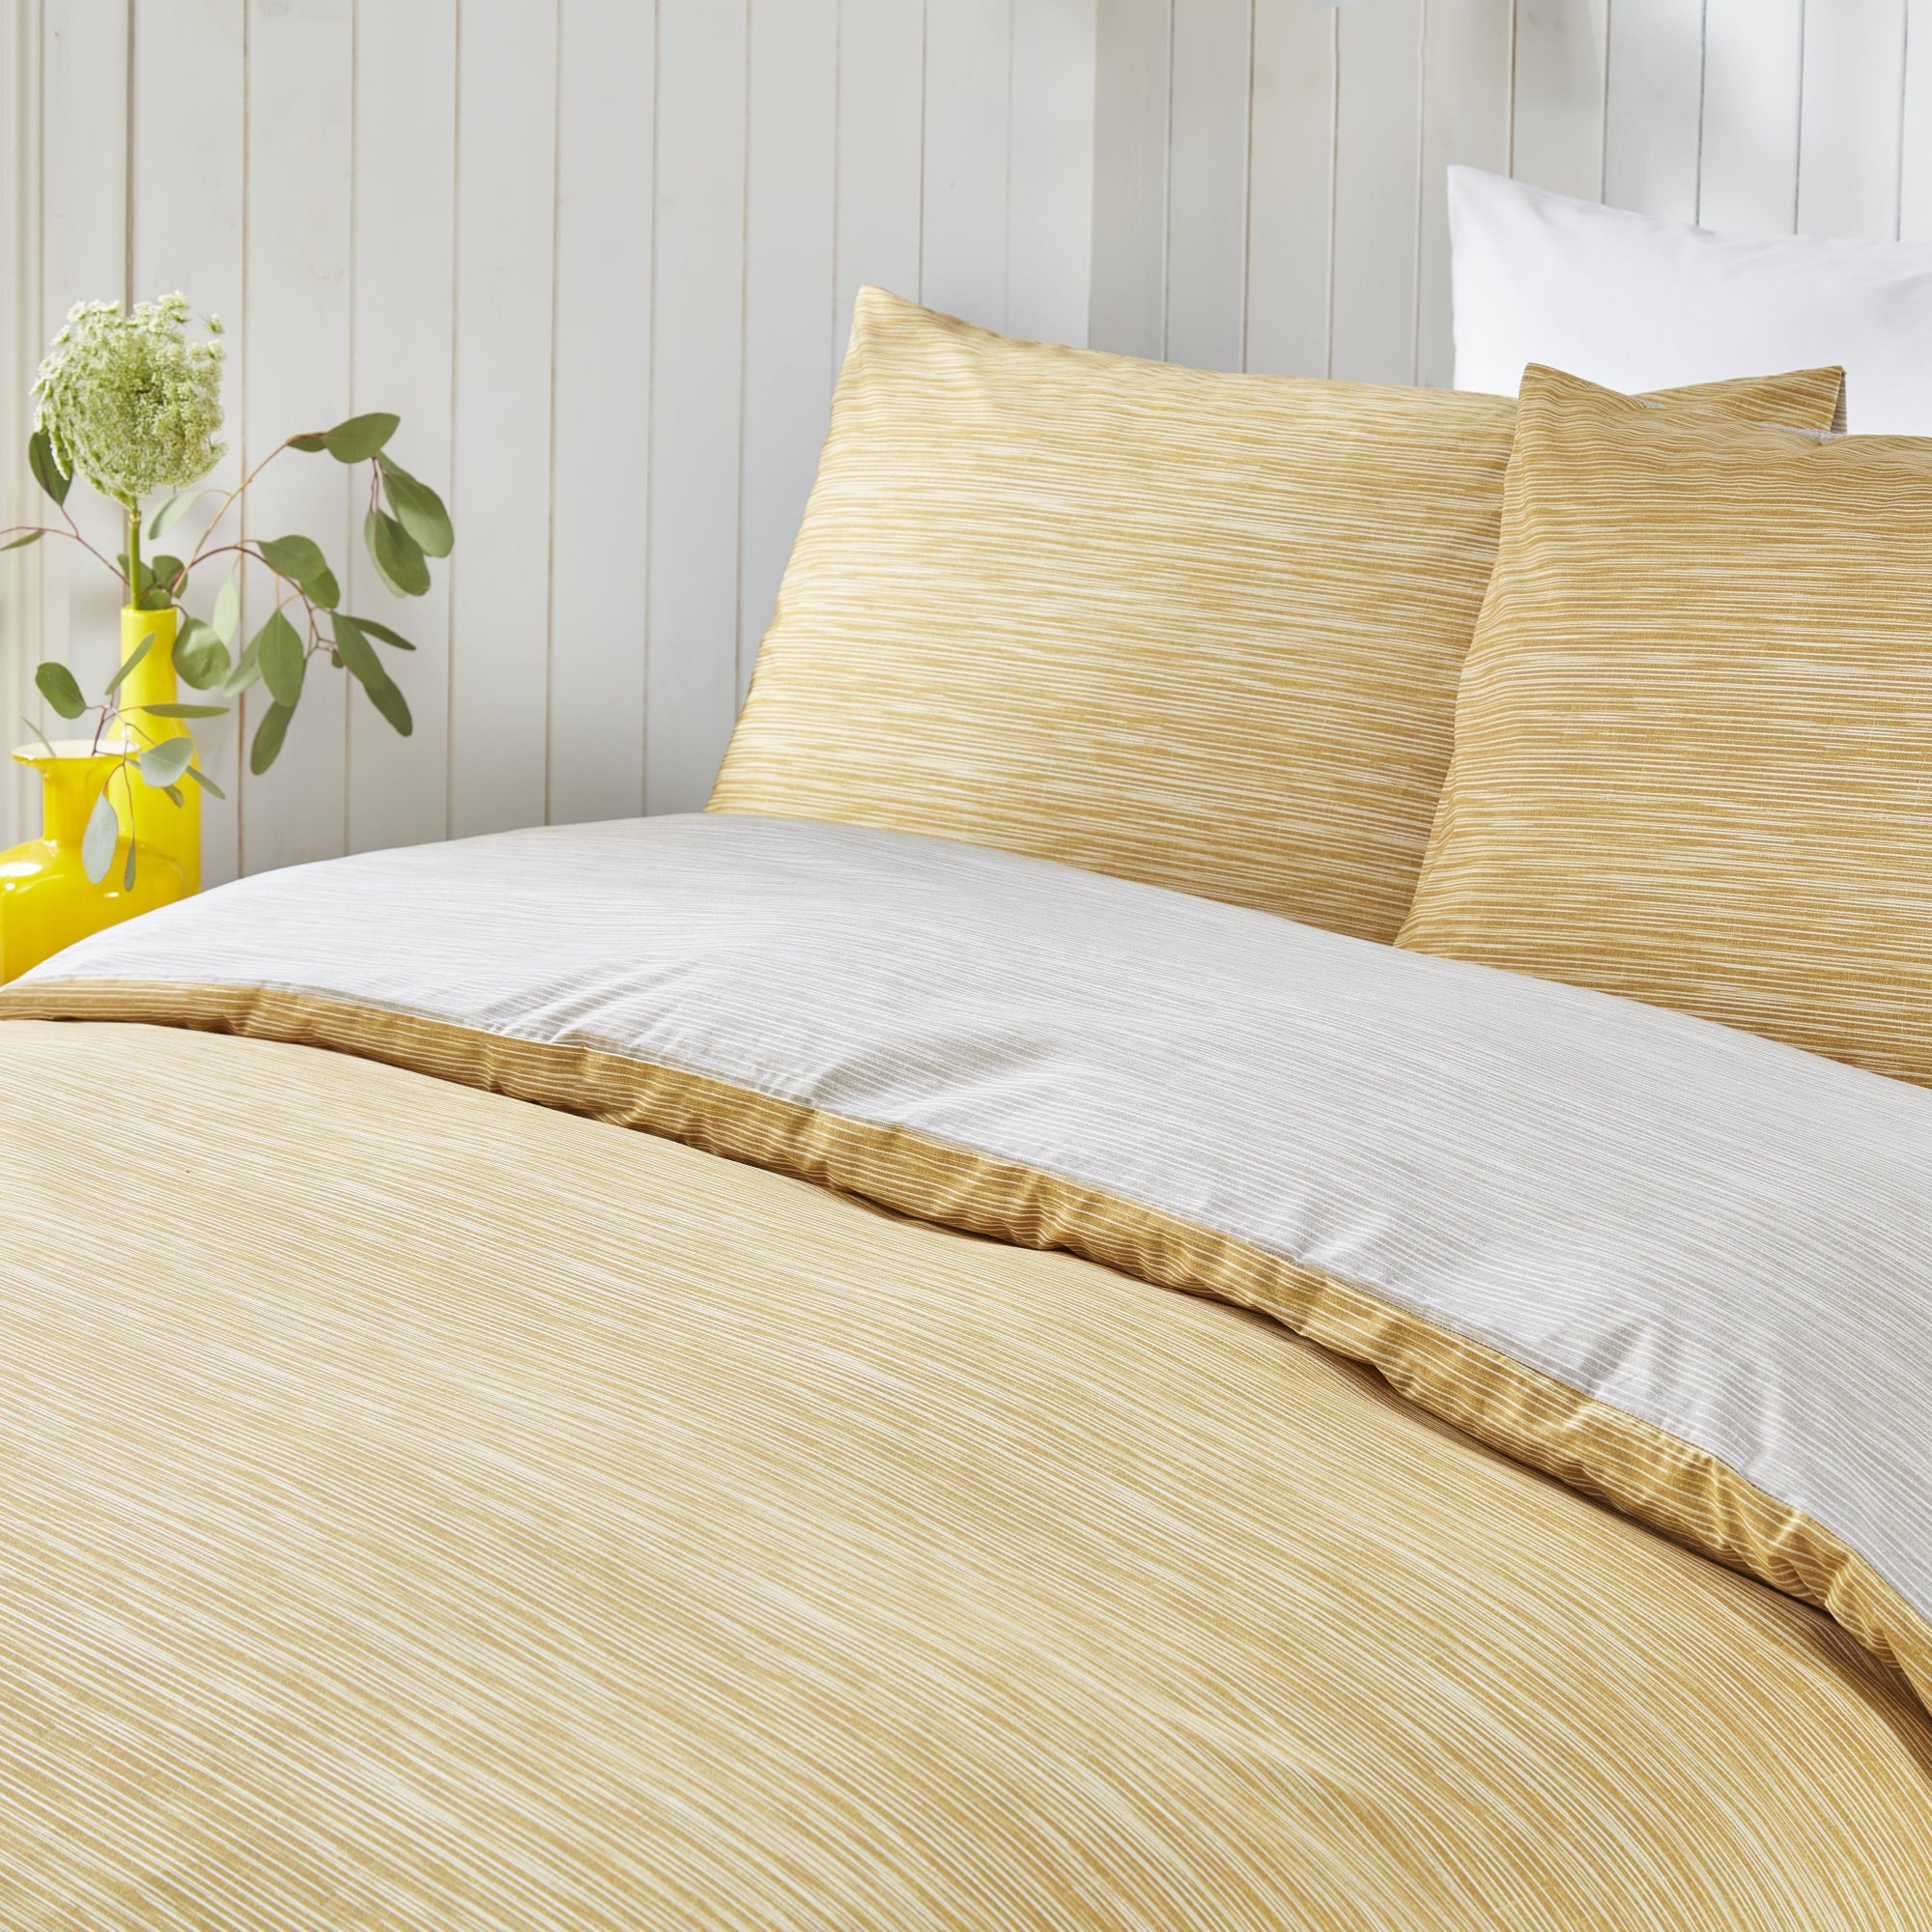 Duvet Cover Set Bethan by Fusion in Ochre/Natural